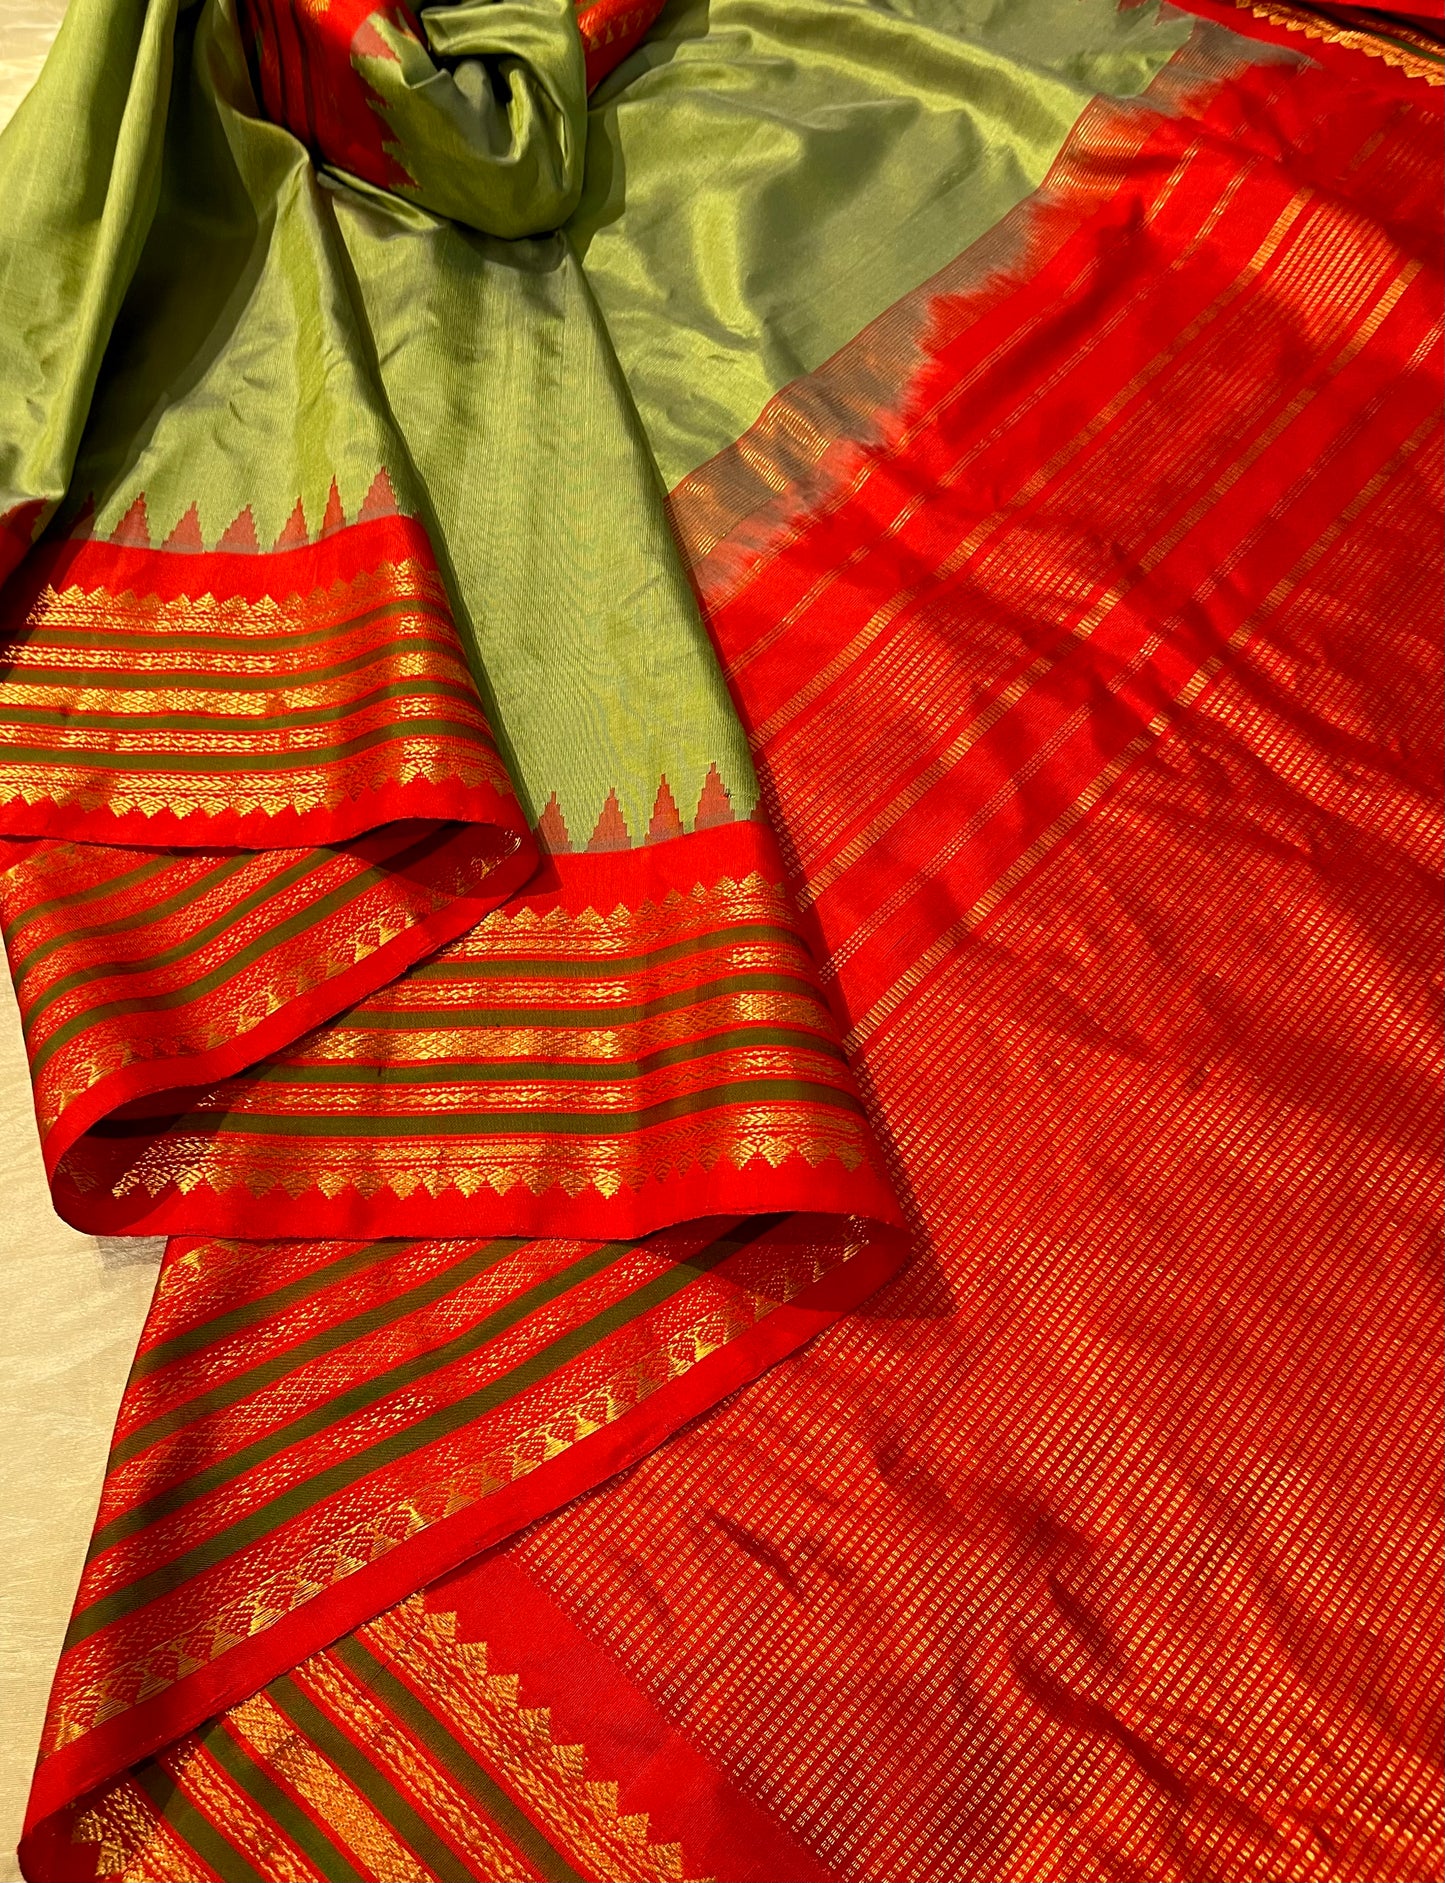 PISTA GREEN COLOR PURE GADWAL SILK SAREE WITH CONTRAST BORDER & PALLA EMBELLISHED WITH ZARI WEAVES